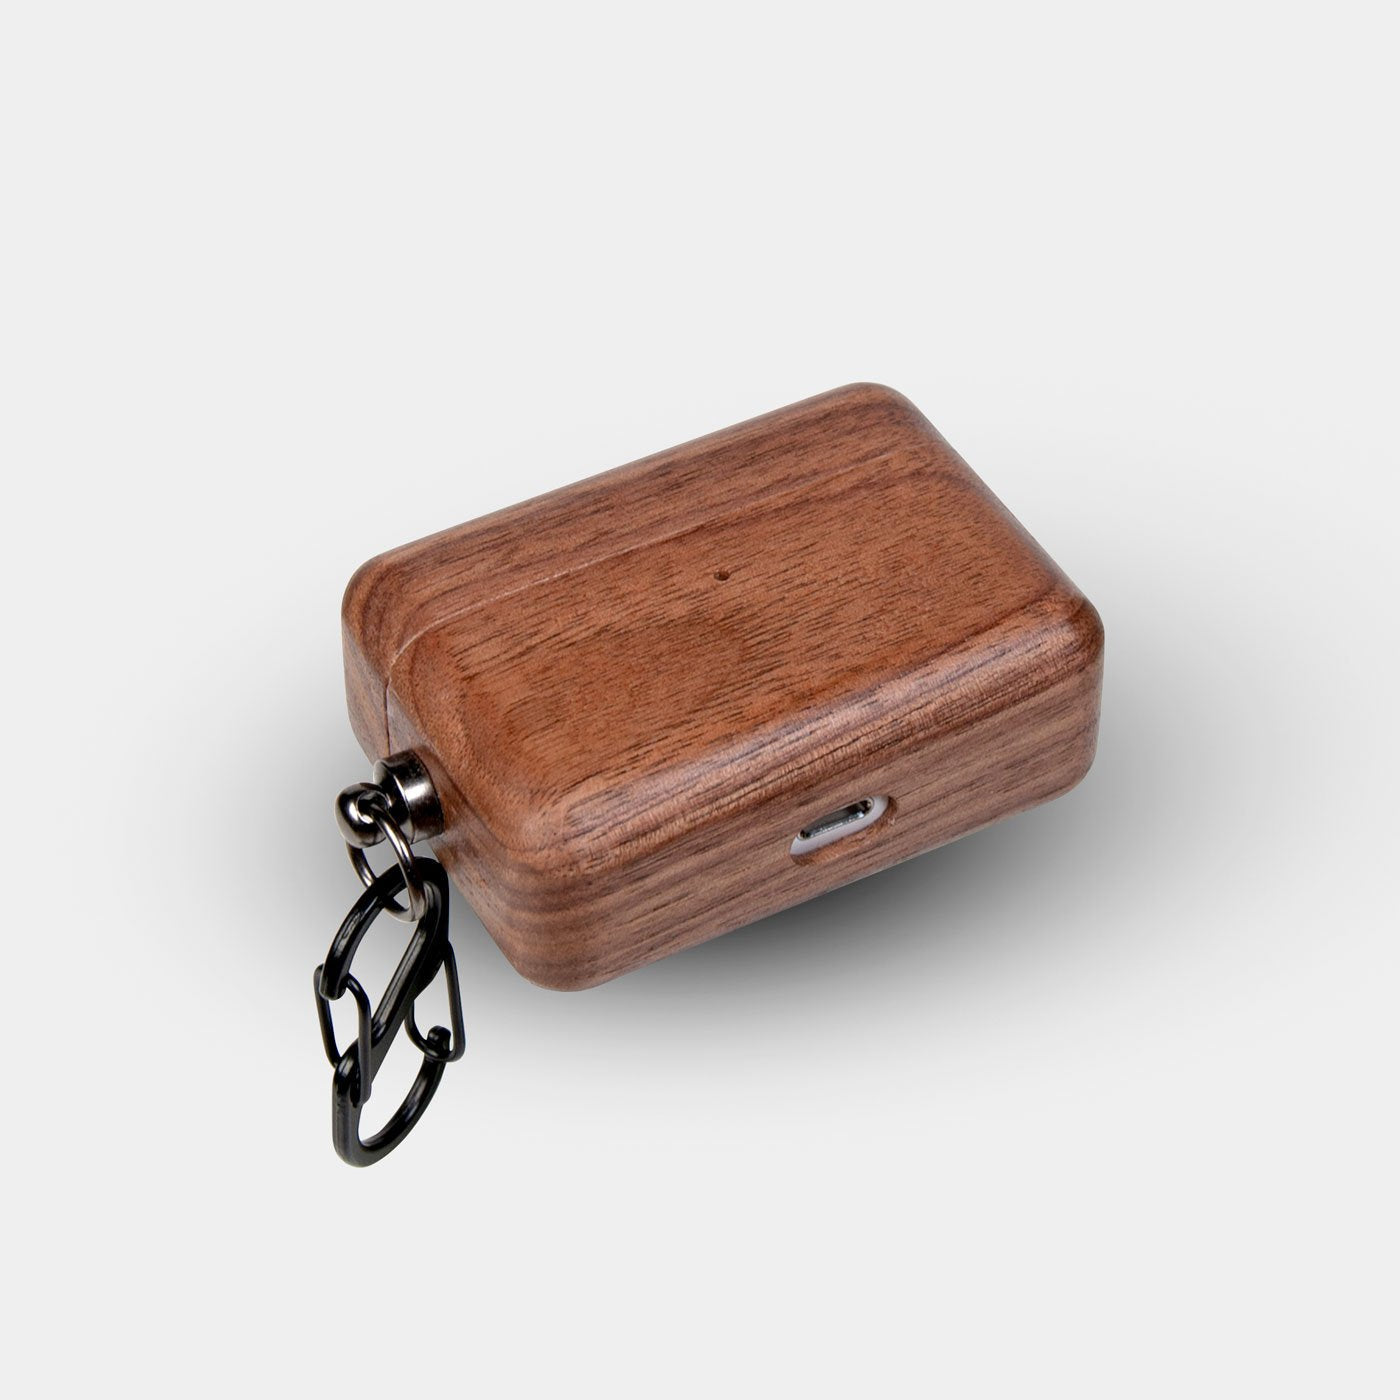 Custom FC Dallas AirPods Cases | AirPods | AirPods Pro - Carved Wood FC Dallas AirPods Cover